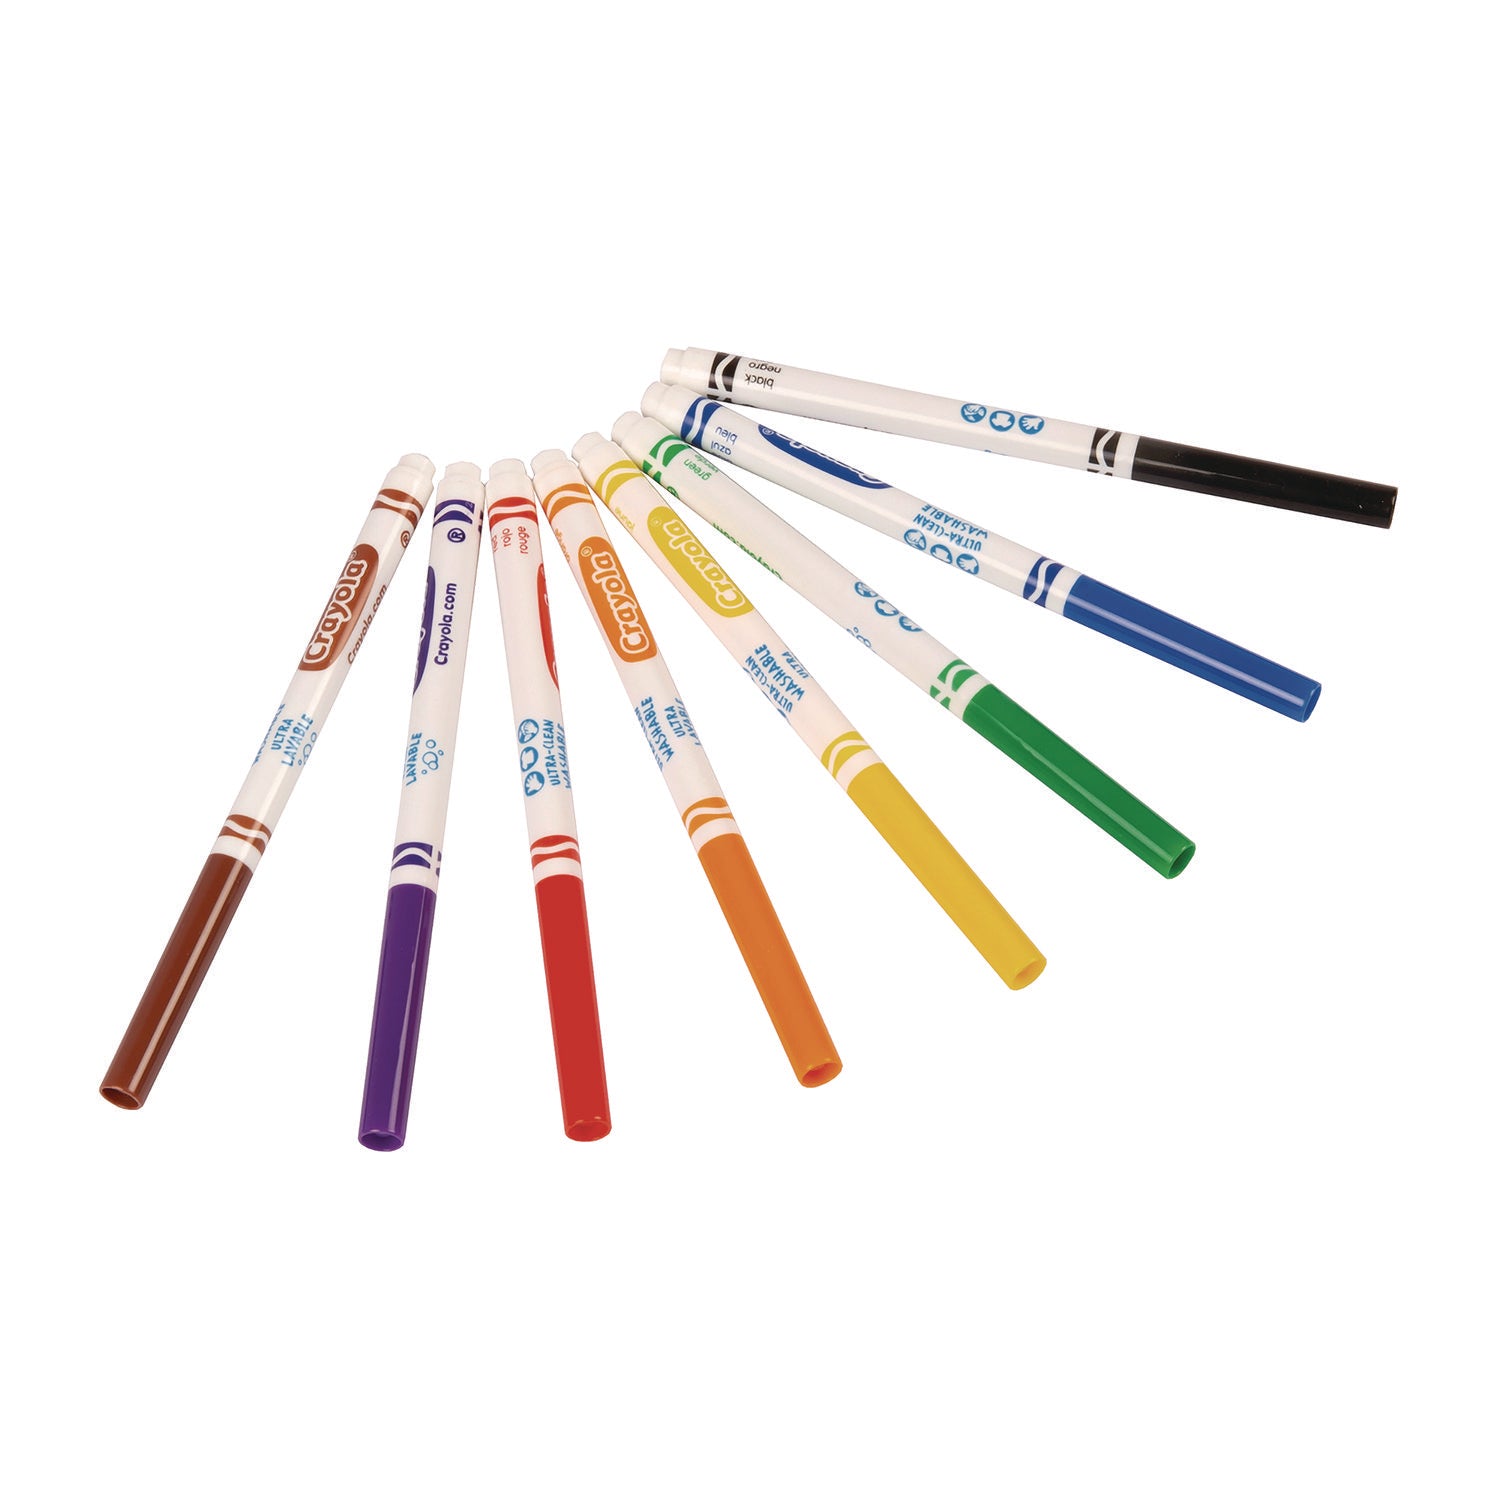 Ultra-Clean Washable Markers, Fine Bullet Tip, Assorted Colors, 8/Pack - 